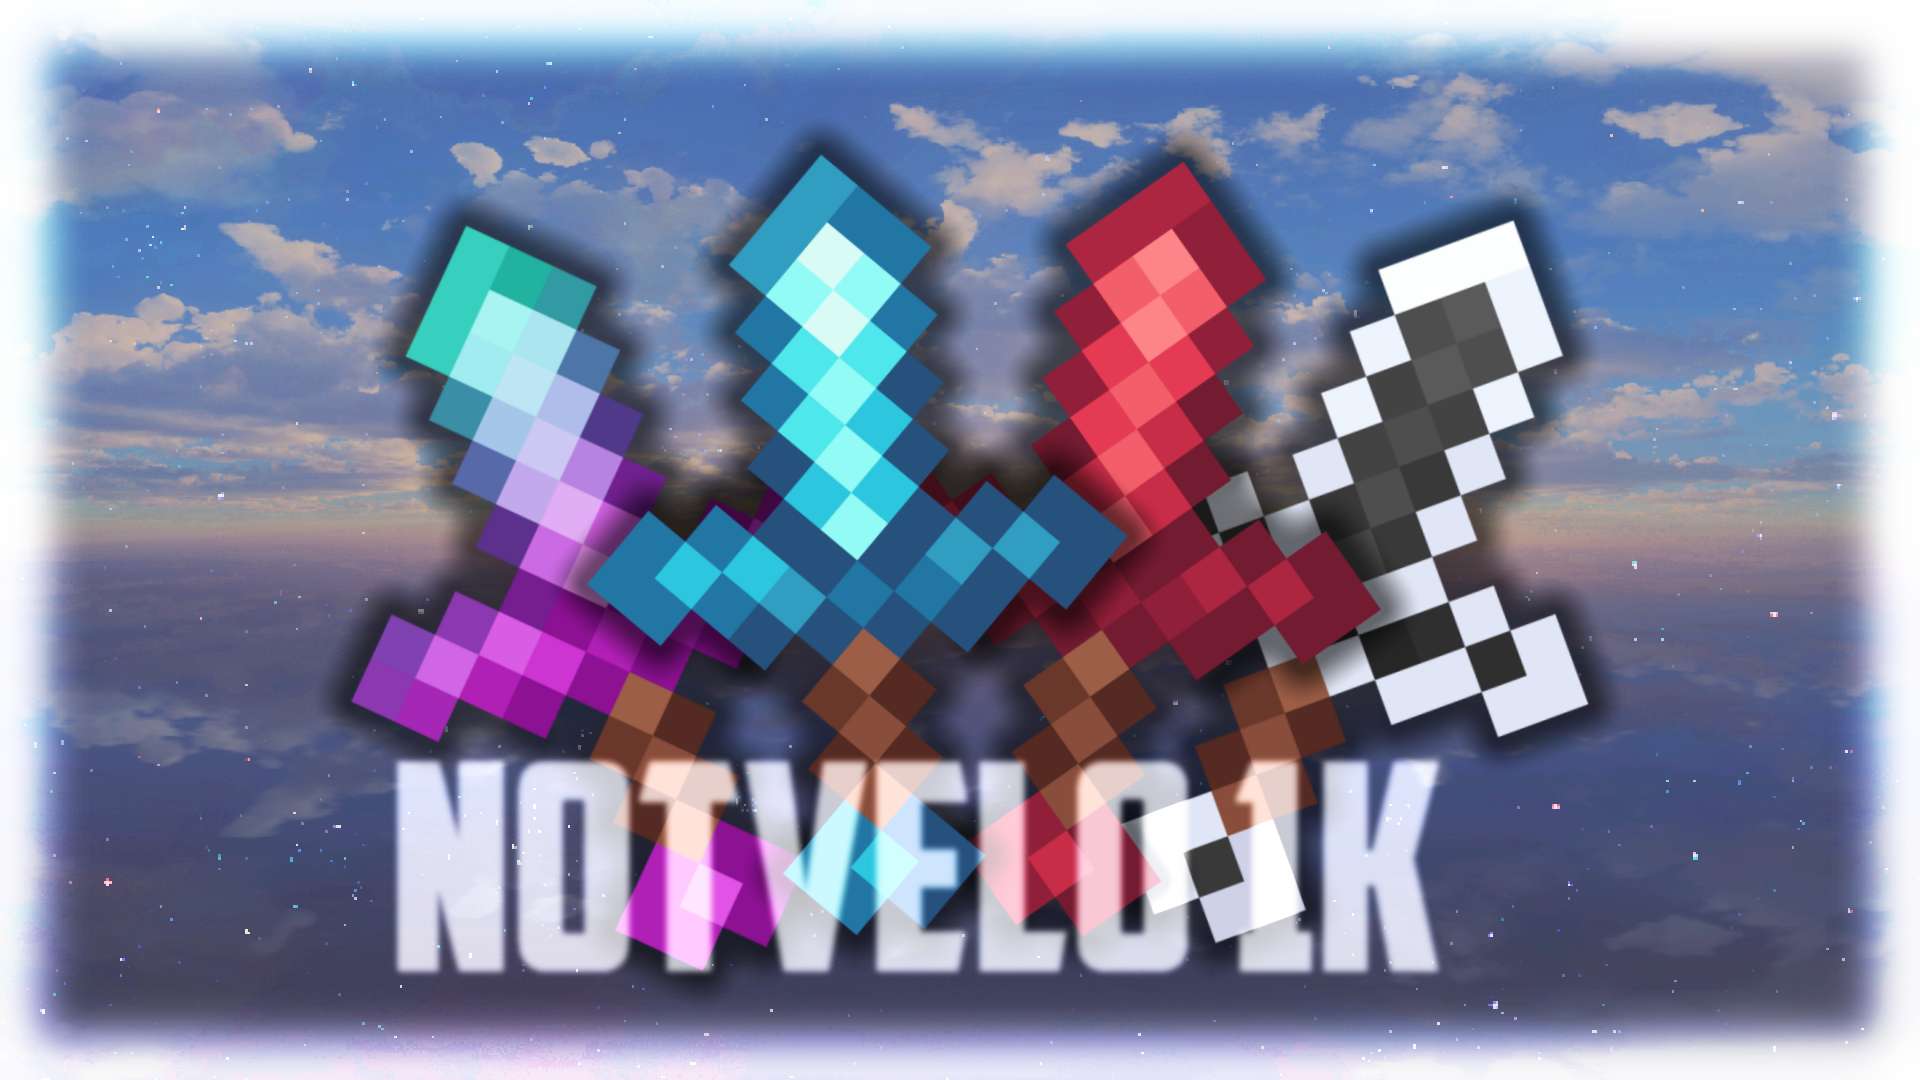 Gallery Banner for NotVelo 1k - Strawberry on PvPRP